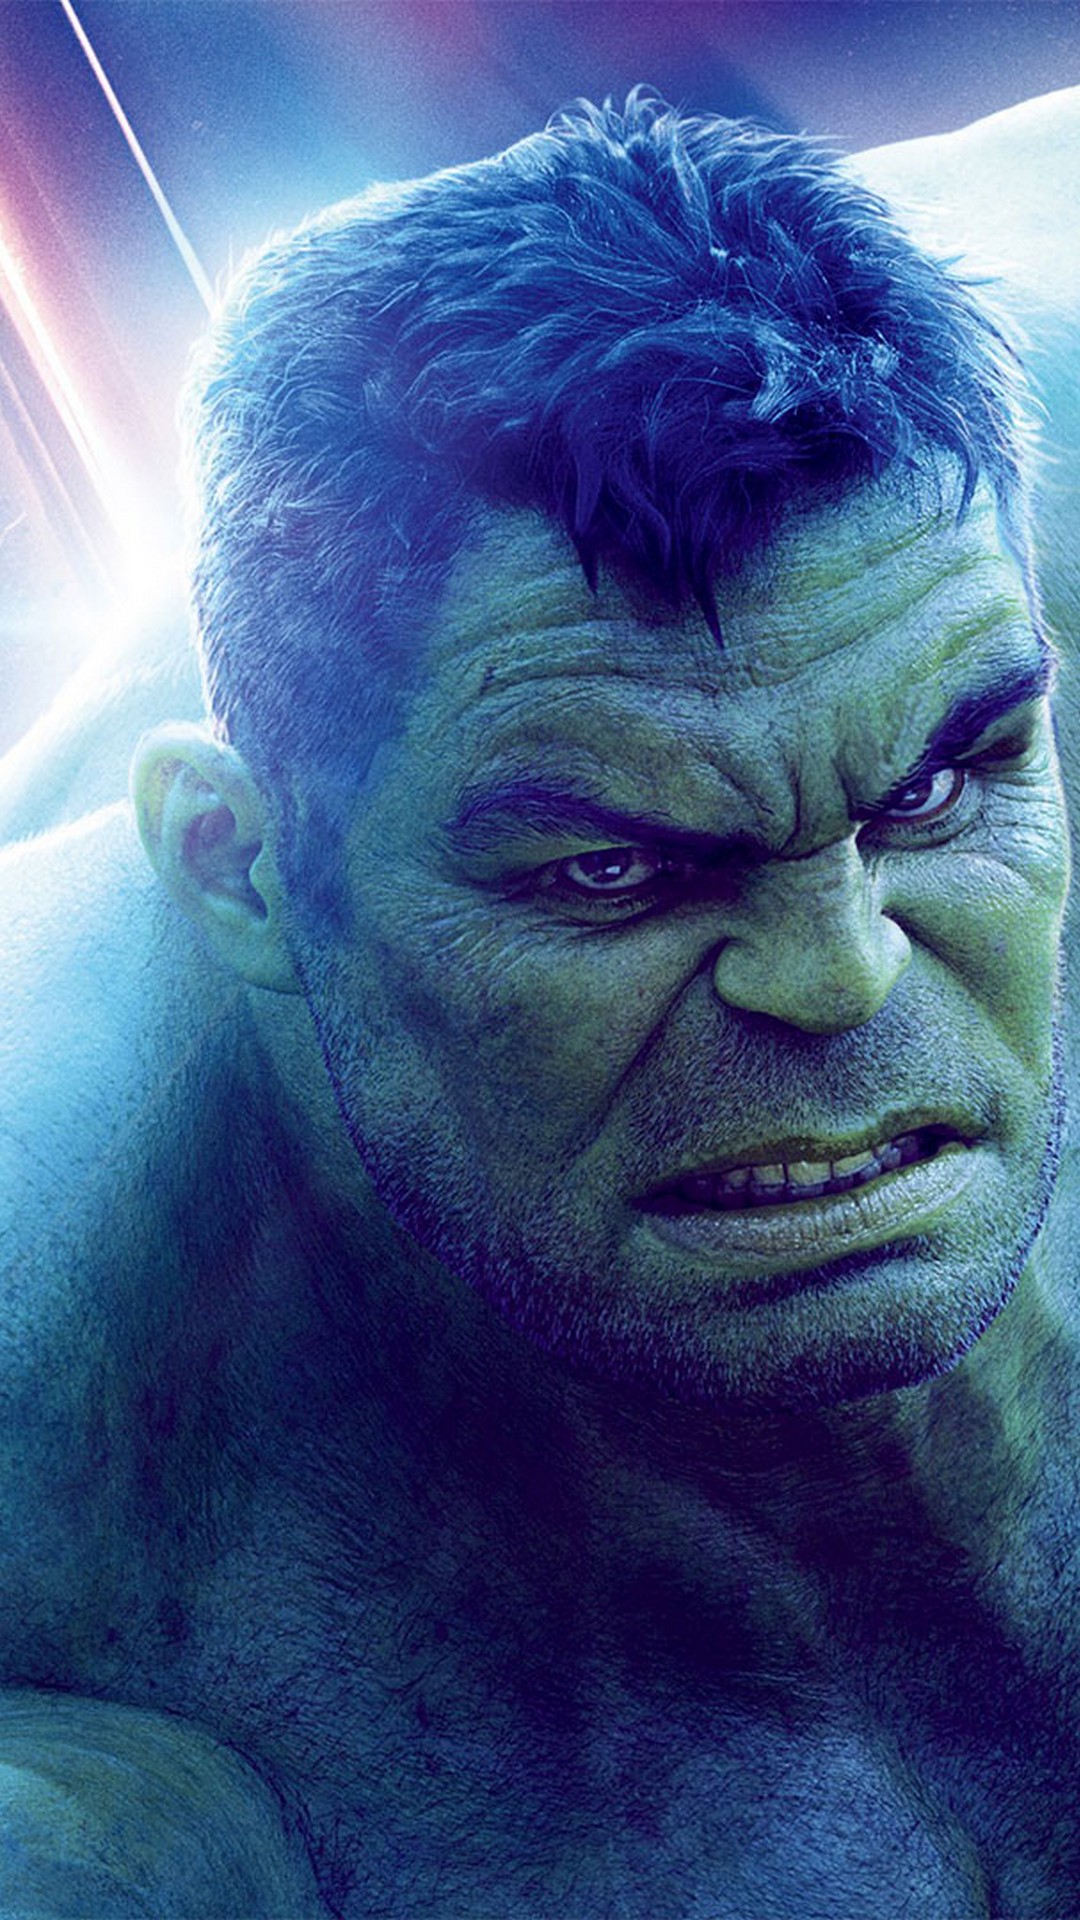 Hulk Avengers Endgame iPhone Wallpaper with high-resolution 1080x1920 pixel. You can use this poster wallpaper for your Desktop Computers, Mac Screensavers, Windows Backgrounds, iPhone Wallpapers, Tablet or Android Lock screen and another Mobile device